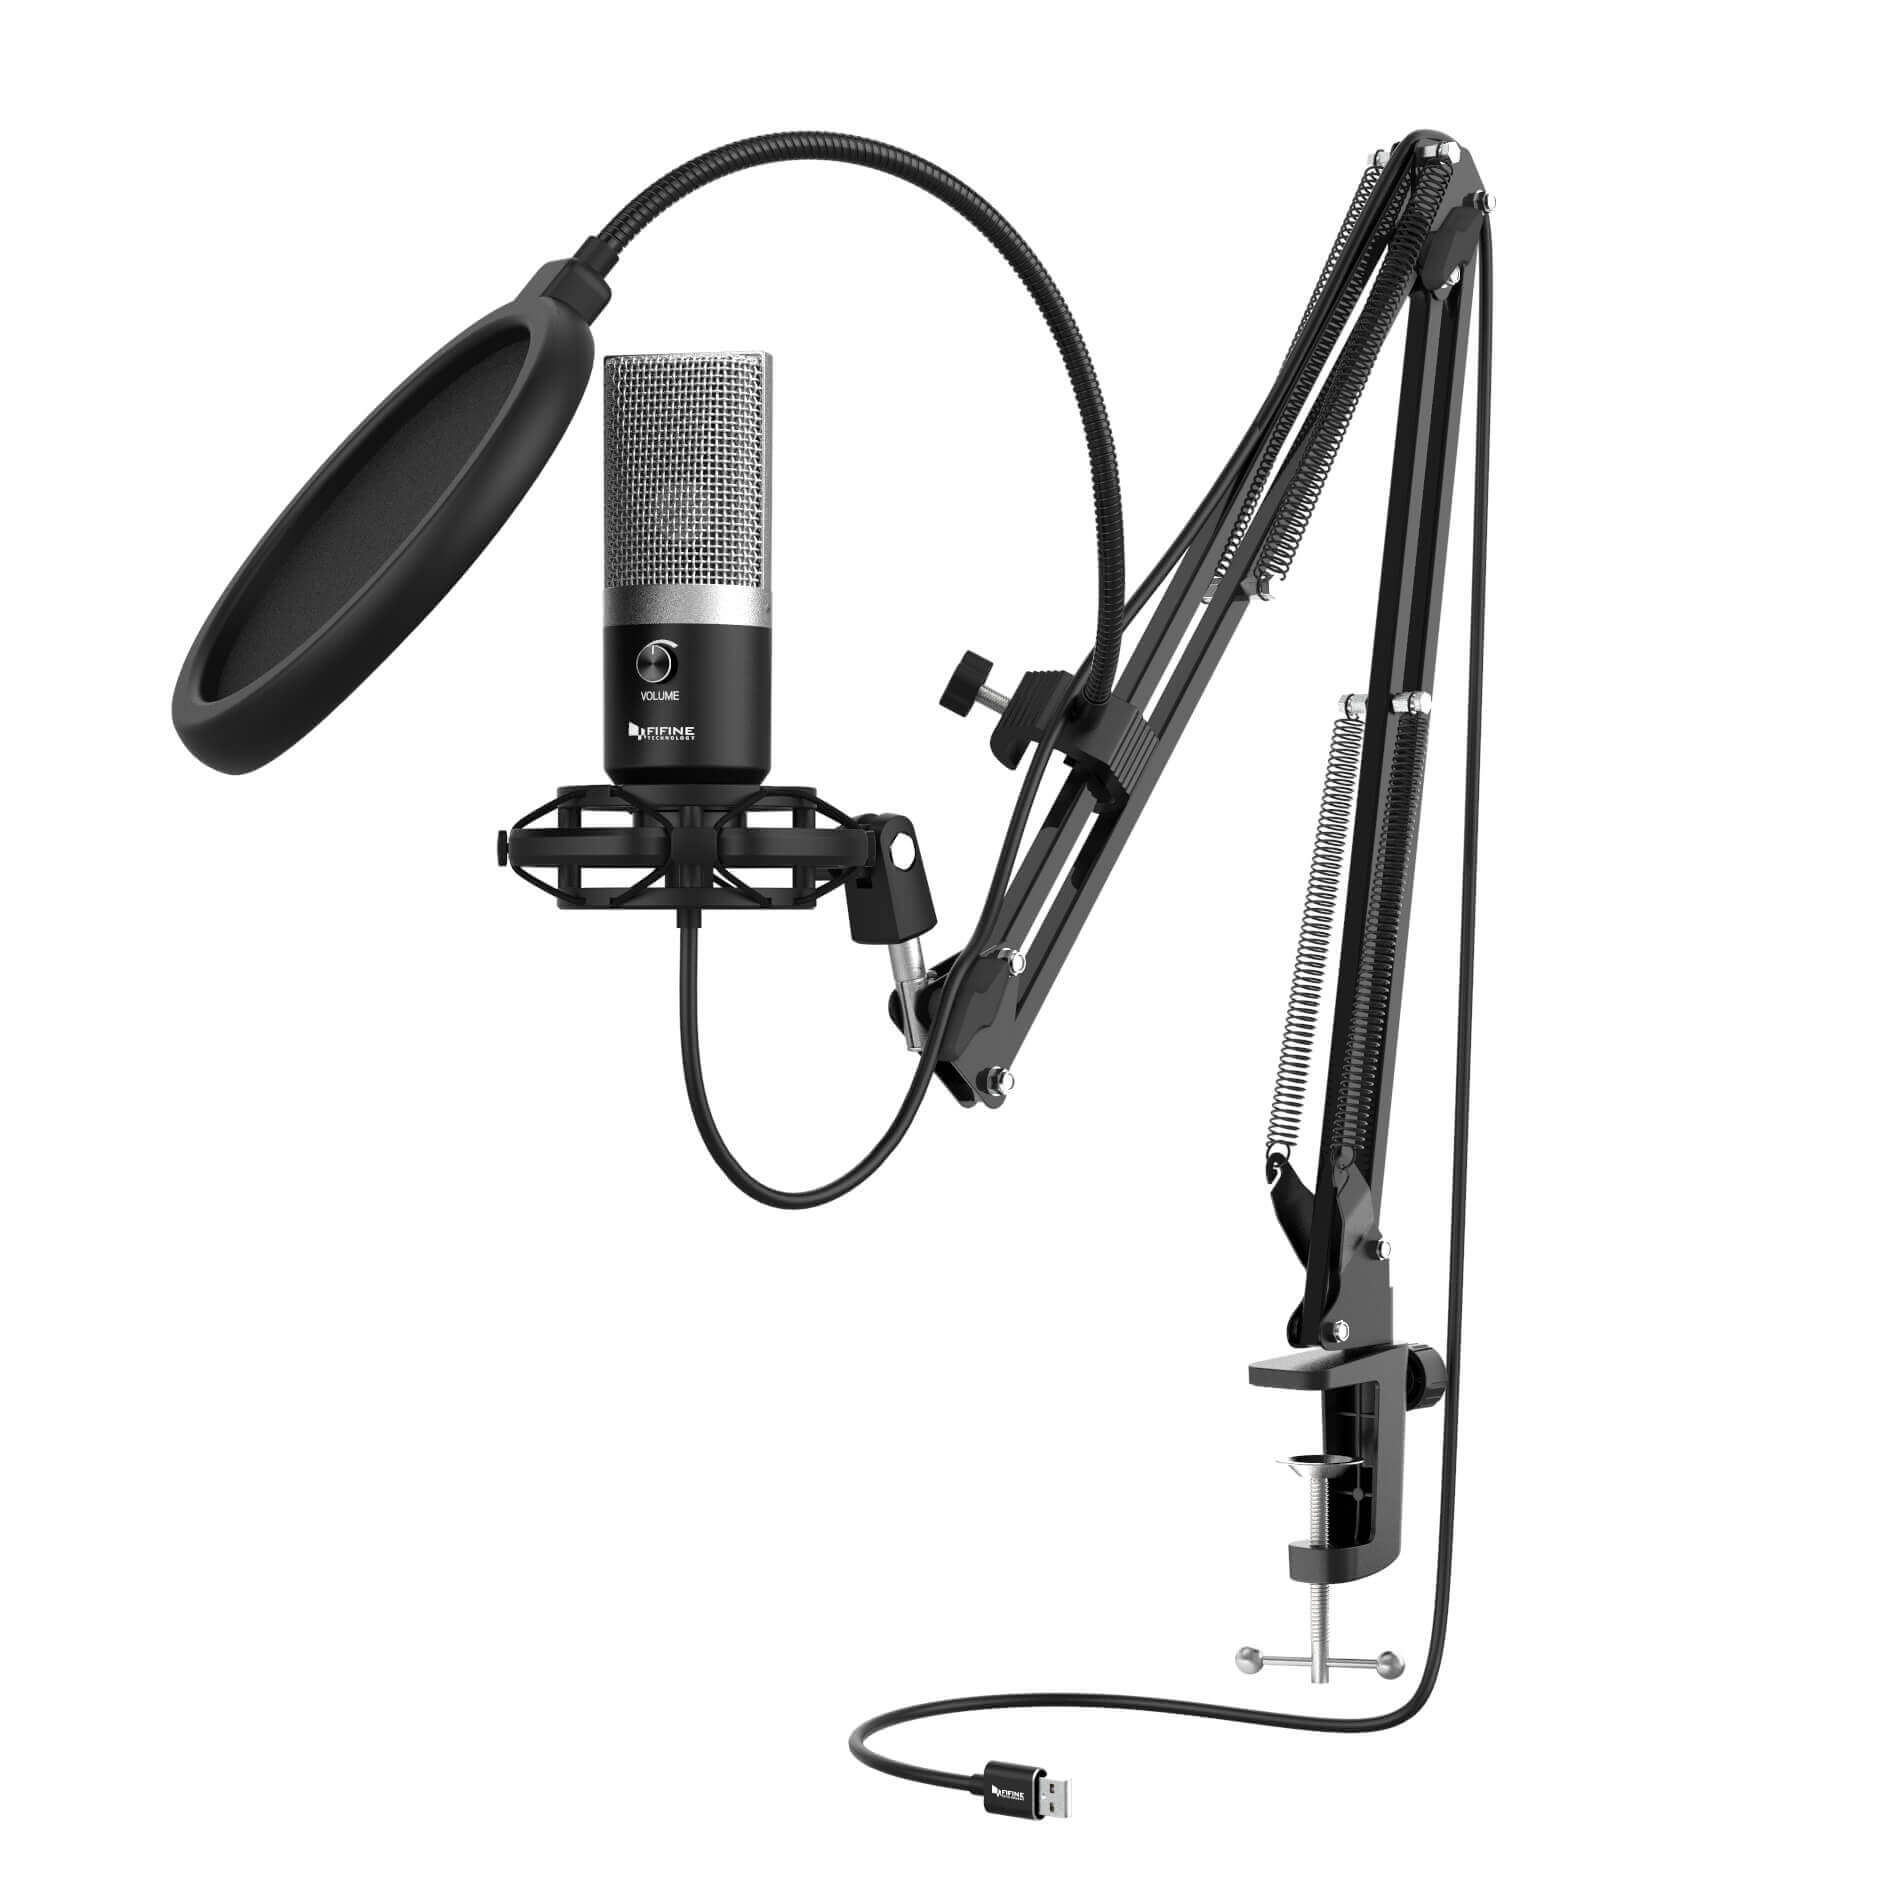 FIFINE T670 USB MICROPHONE